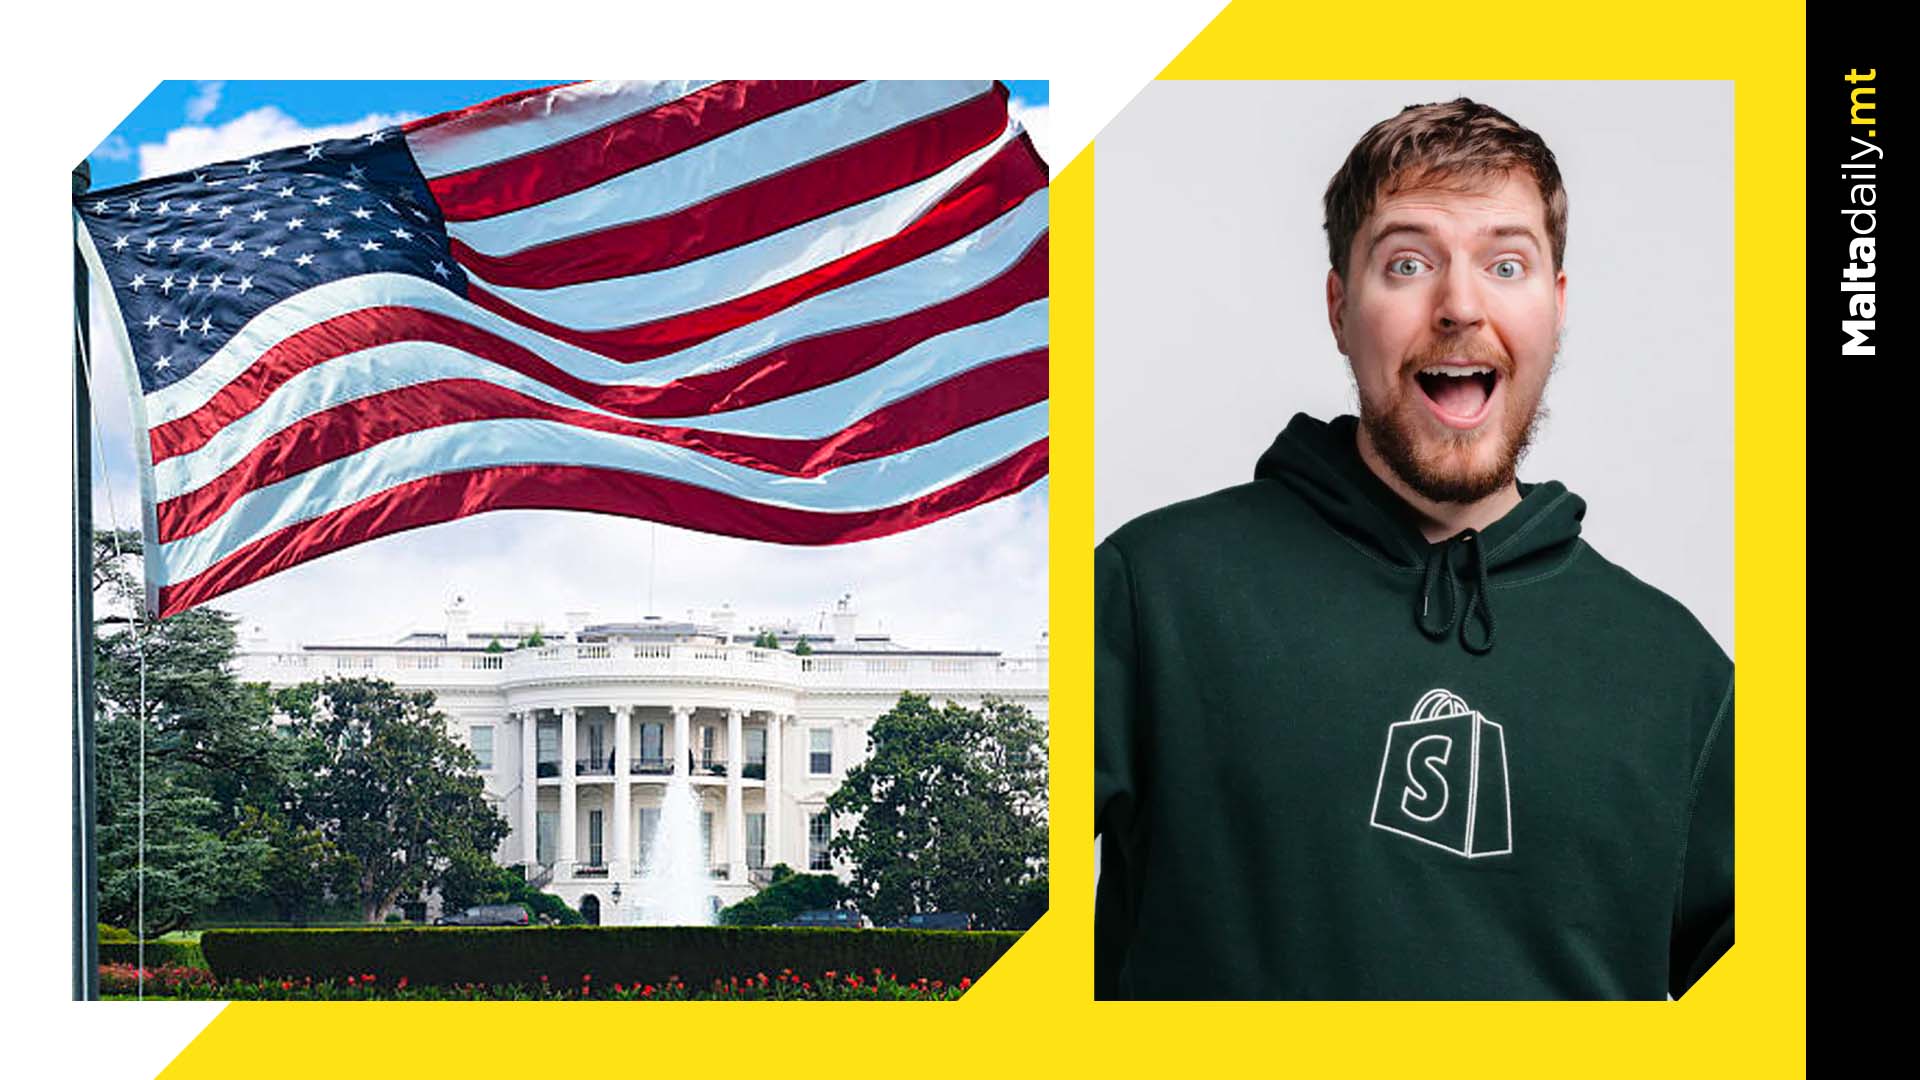 YouTuber Mr Beast asks followers if he should run for President